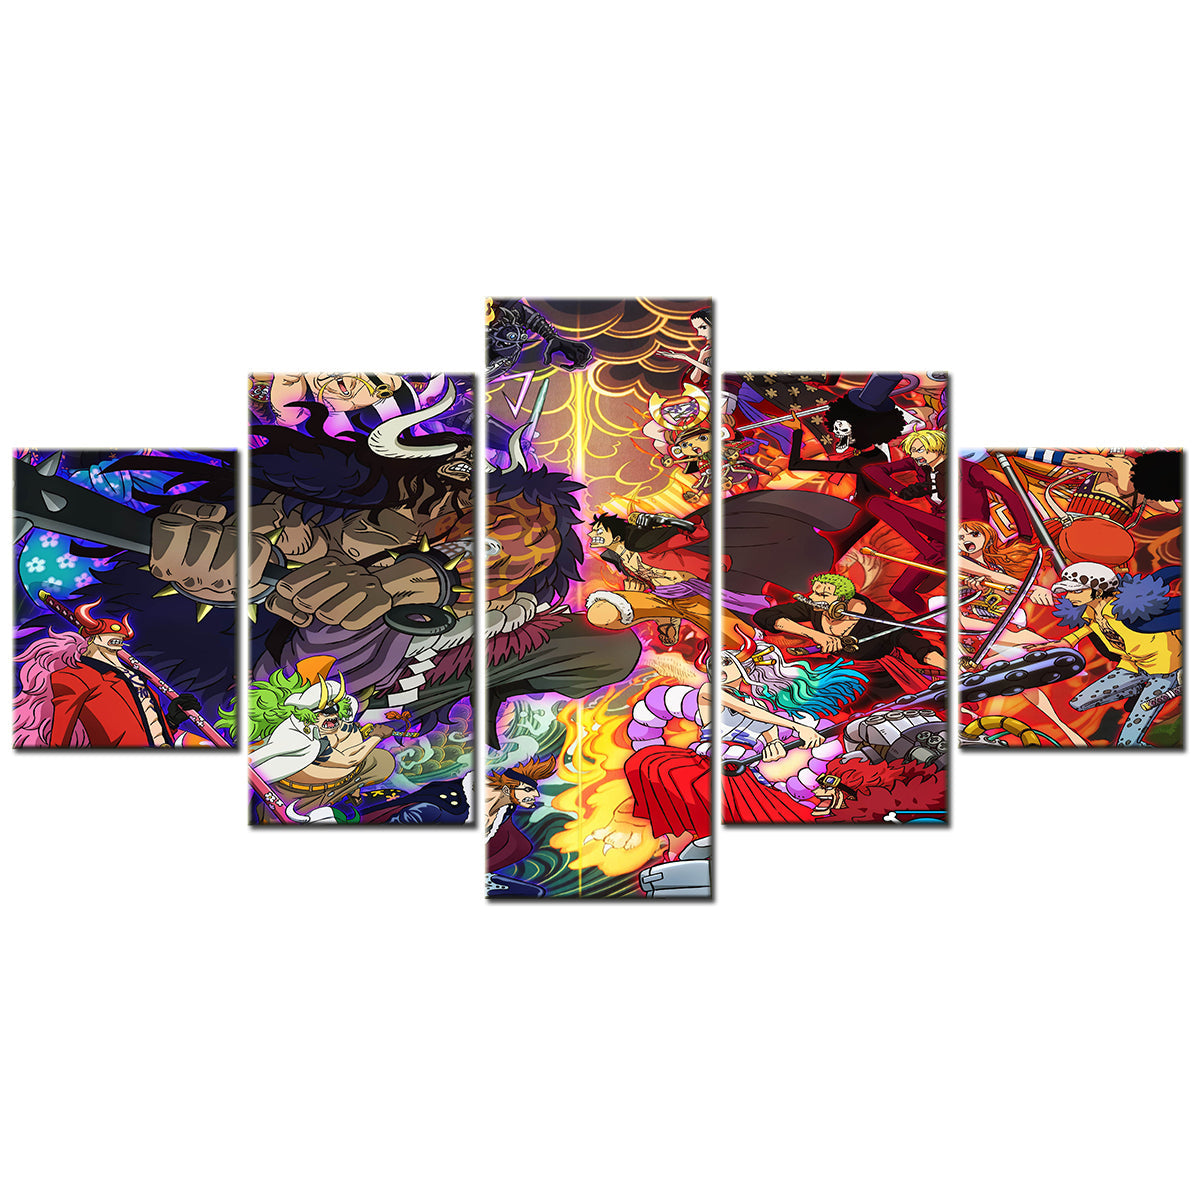 One Piece - 5 Pieces Wall Art - Monkey D. Luffy - Roronoa Zoro 2 - Printed Wall Pictures Home Decor - One Piece Poster - One Piece Canvas